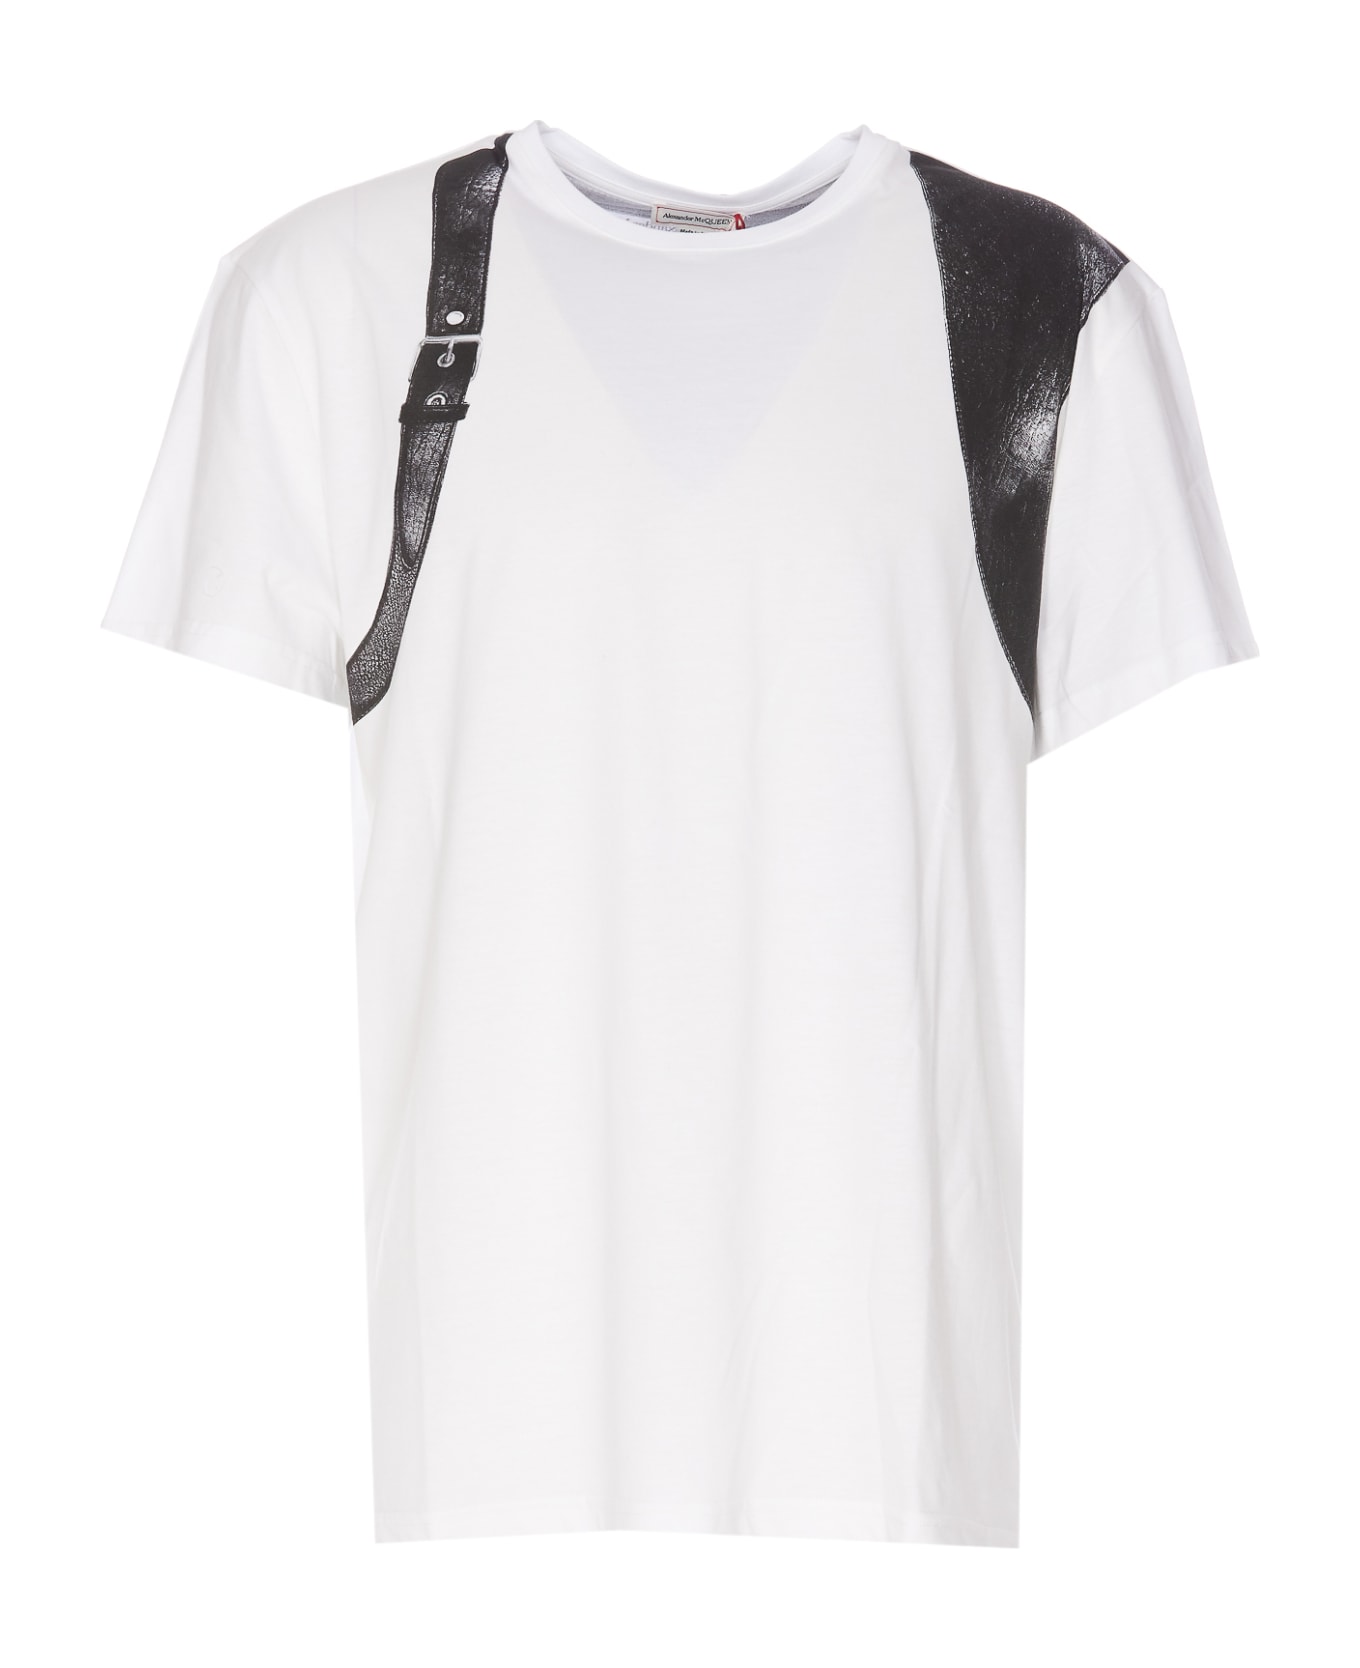 Alexander McQueen Harness T-shirt In White And Black - Bianco